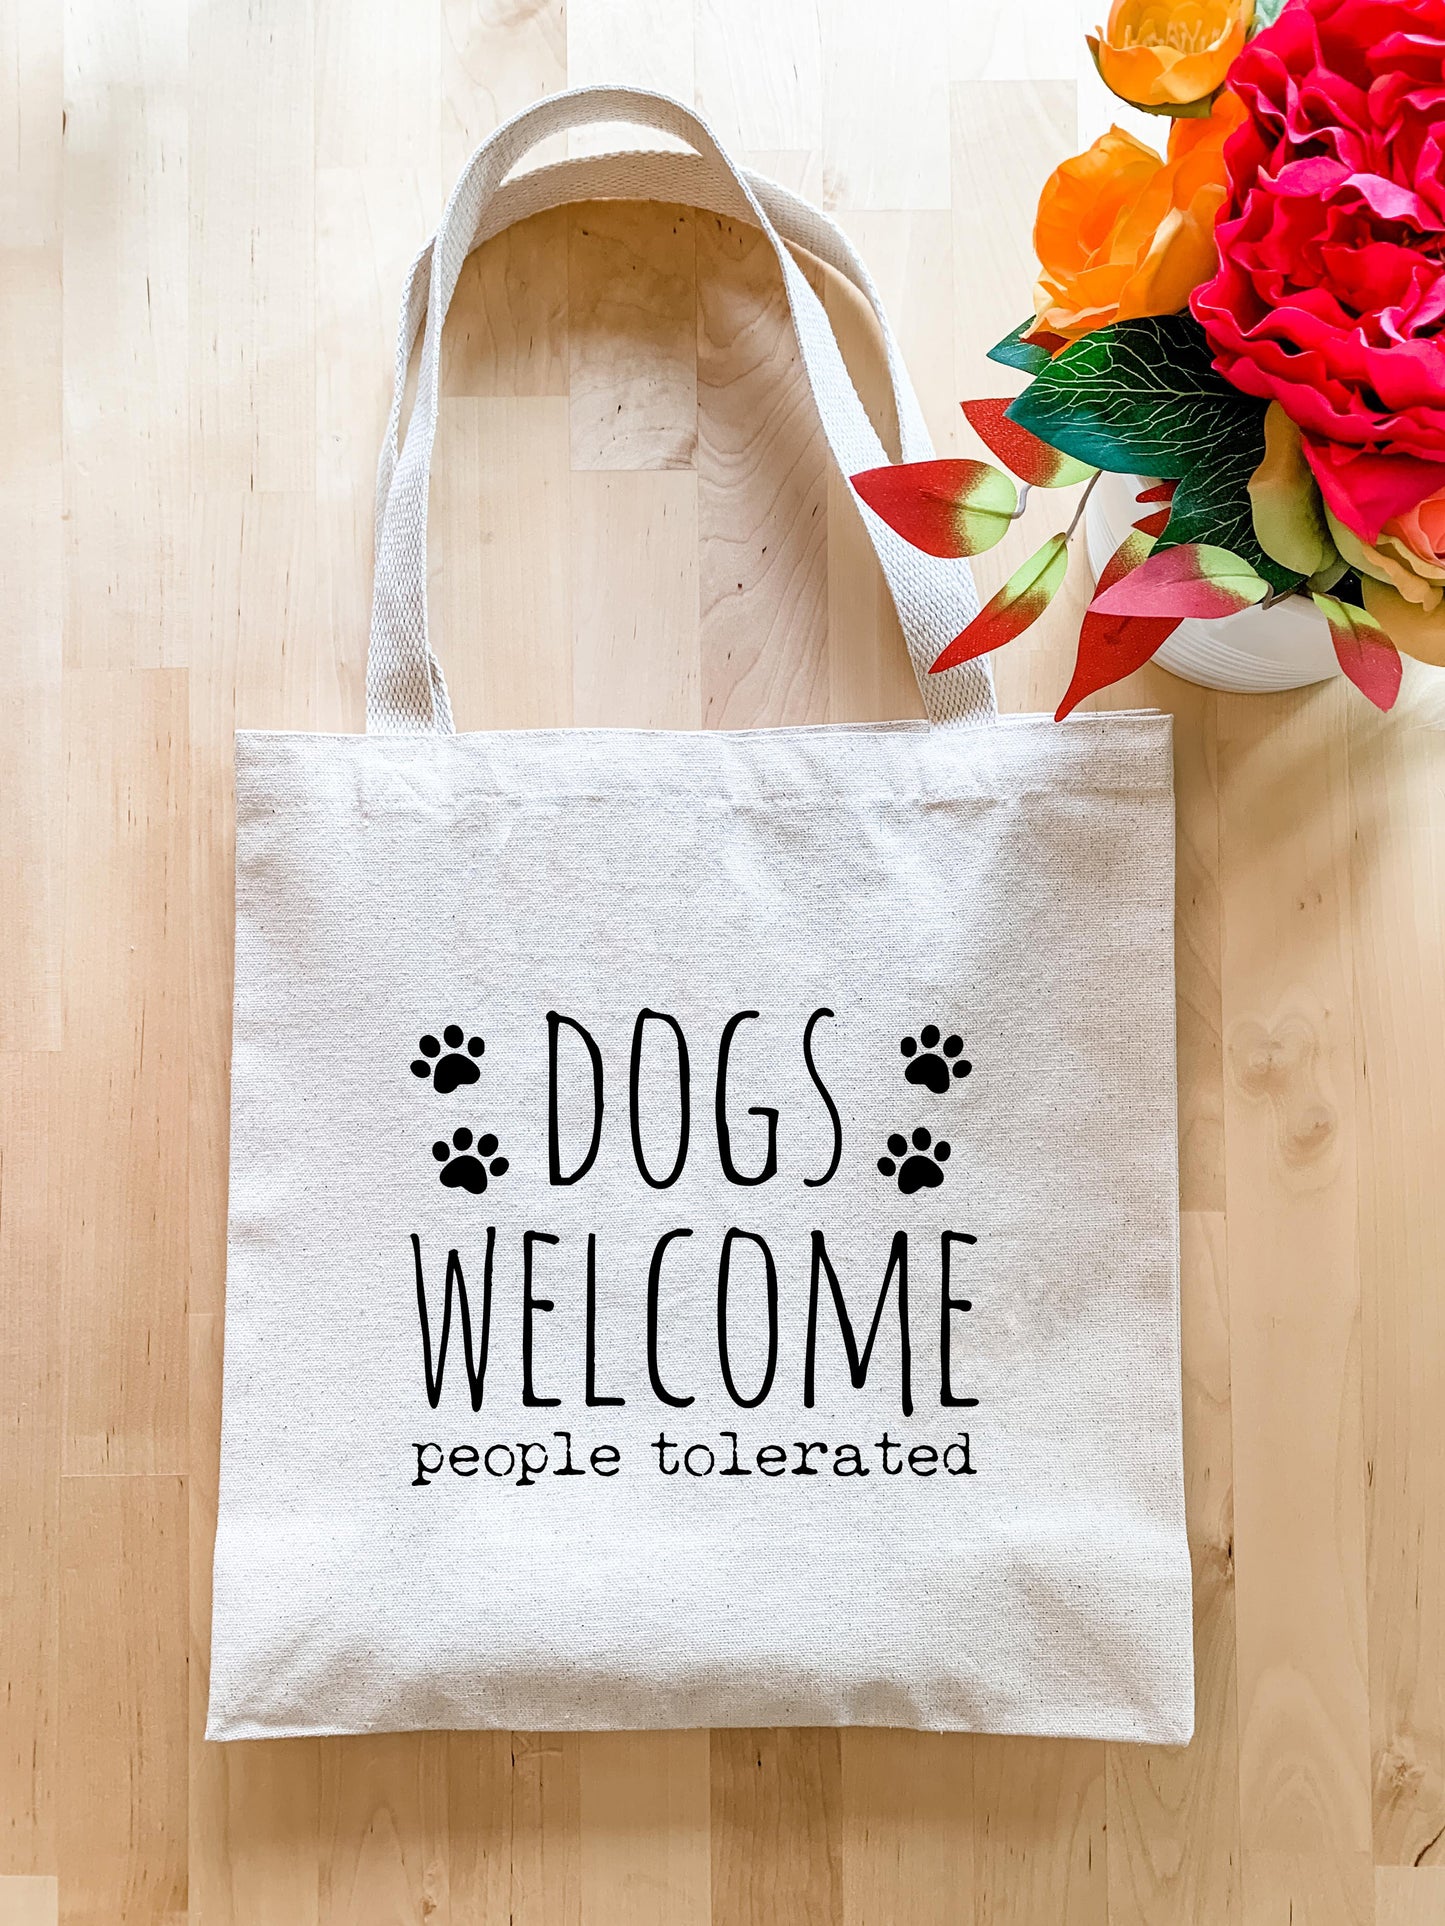 Dogs Welcome, People Tolerated - Tote Bag - MoonlightMakers